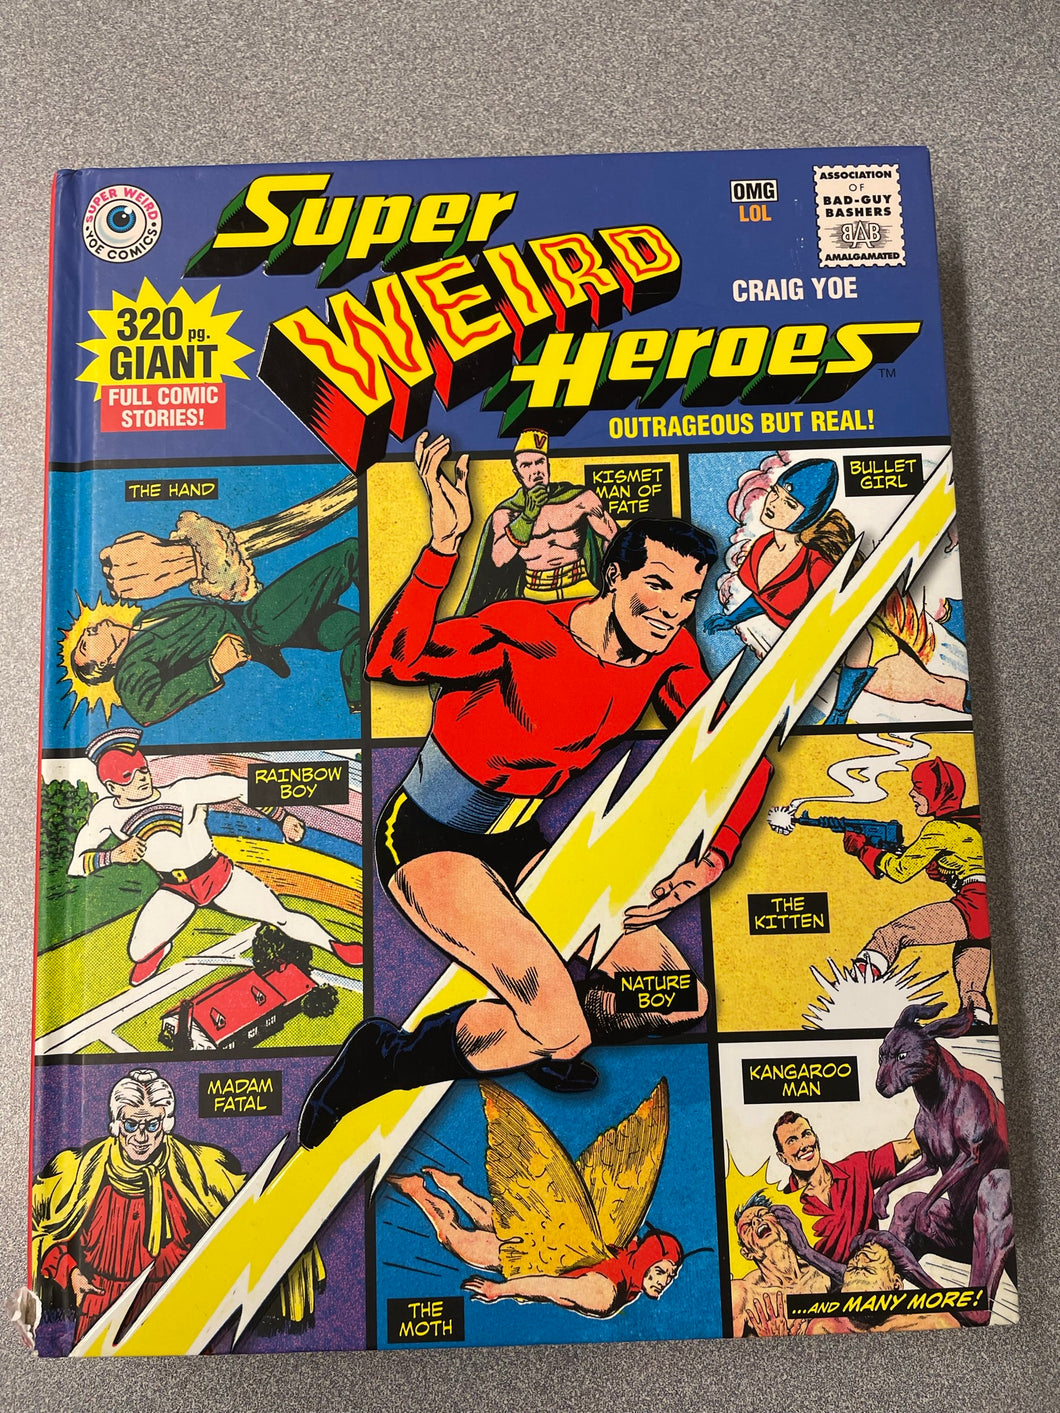 Super Weird Heroes: Outrageous But Real!, Lee, Craig, ed., [2016] GN 1/23